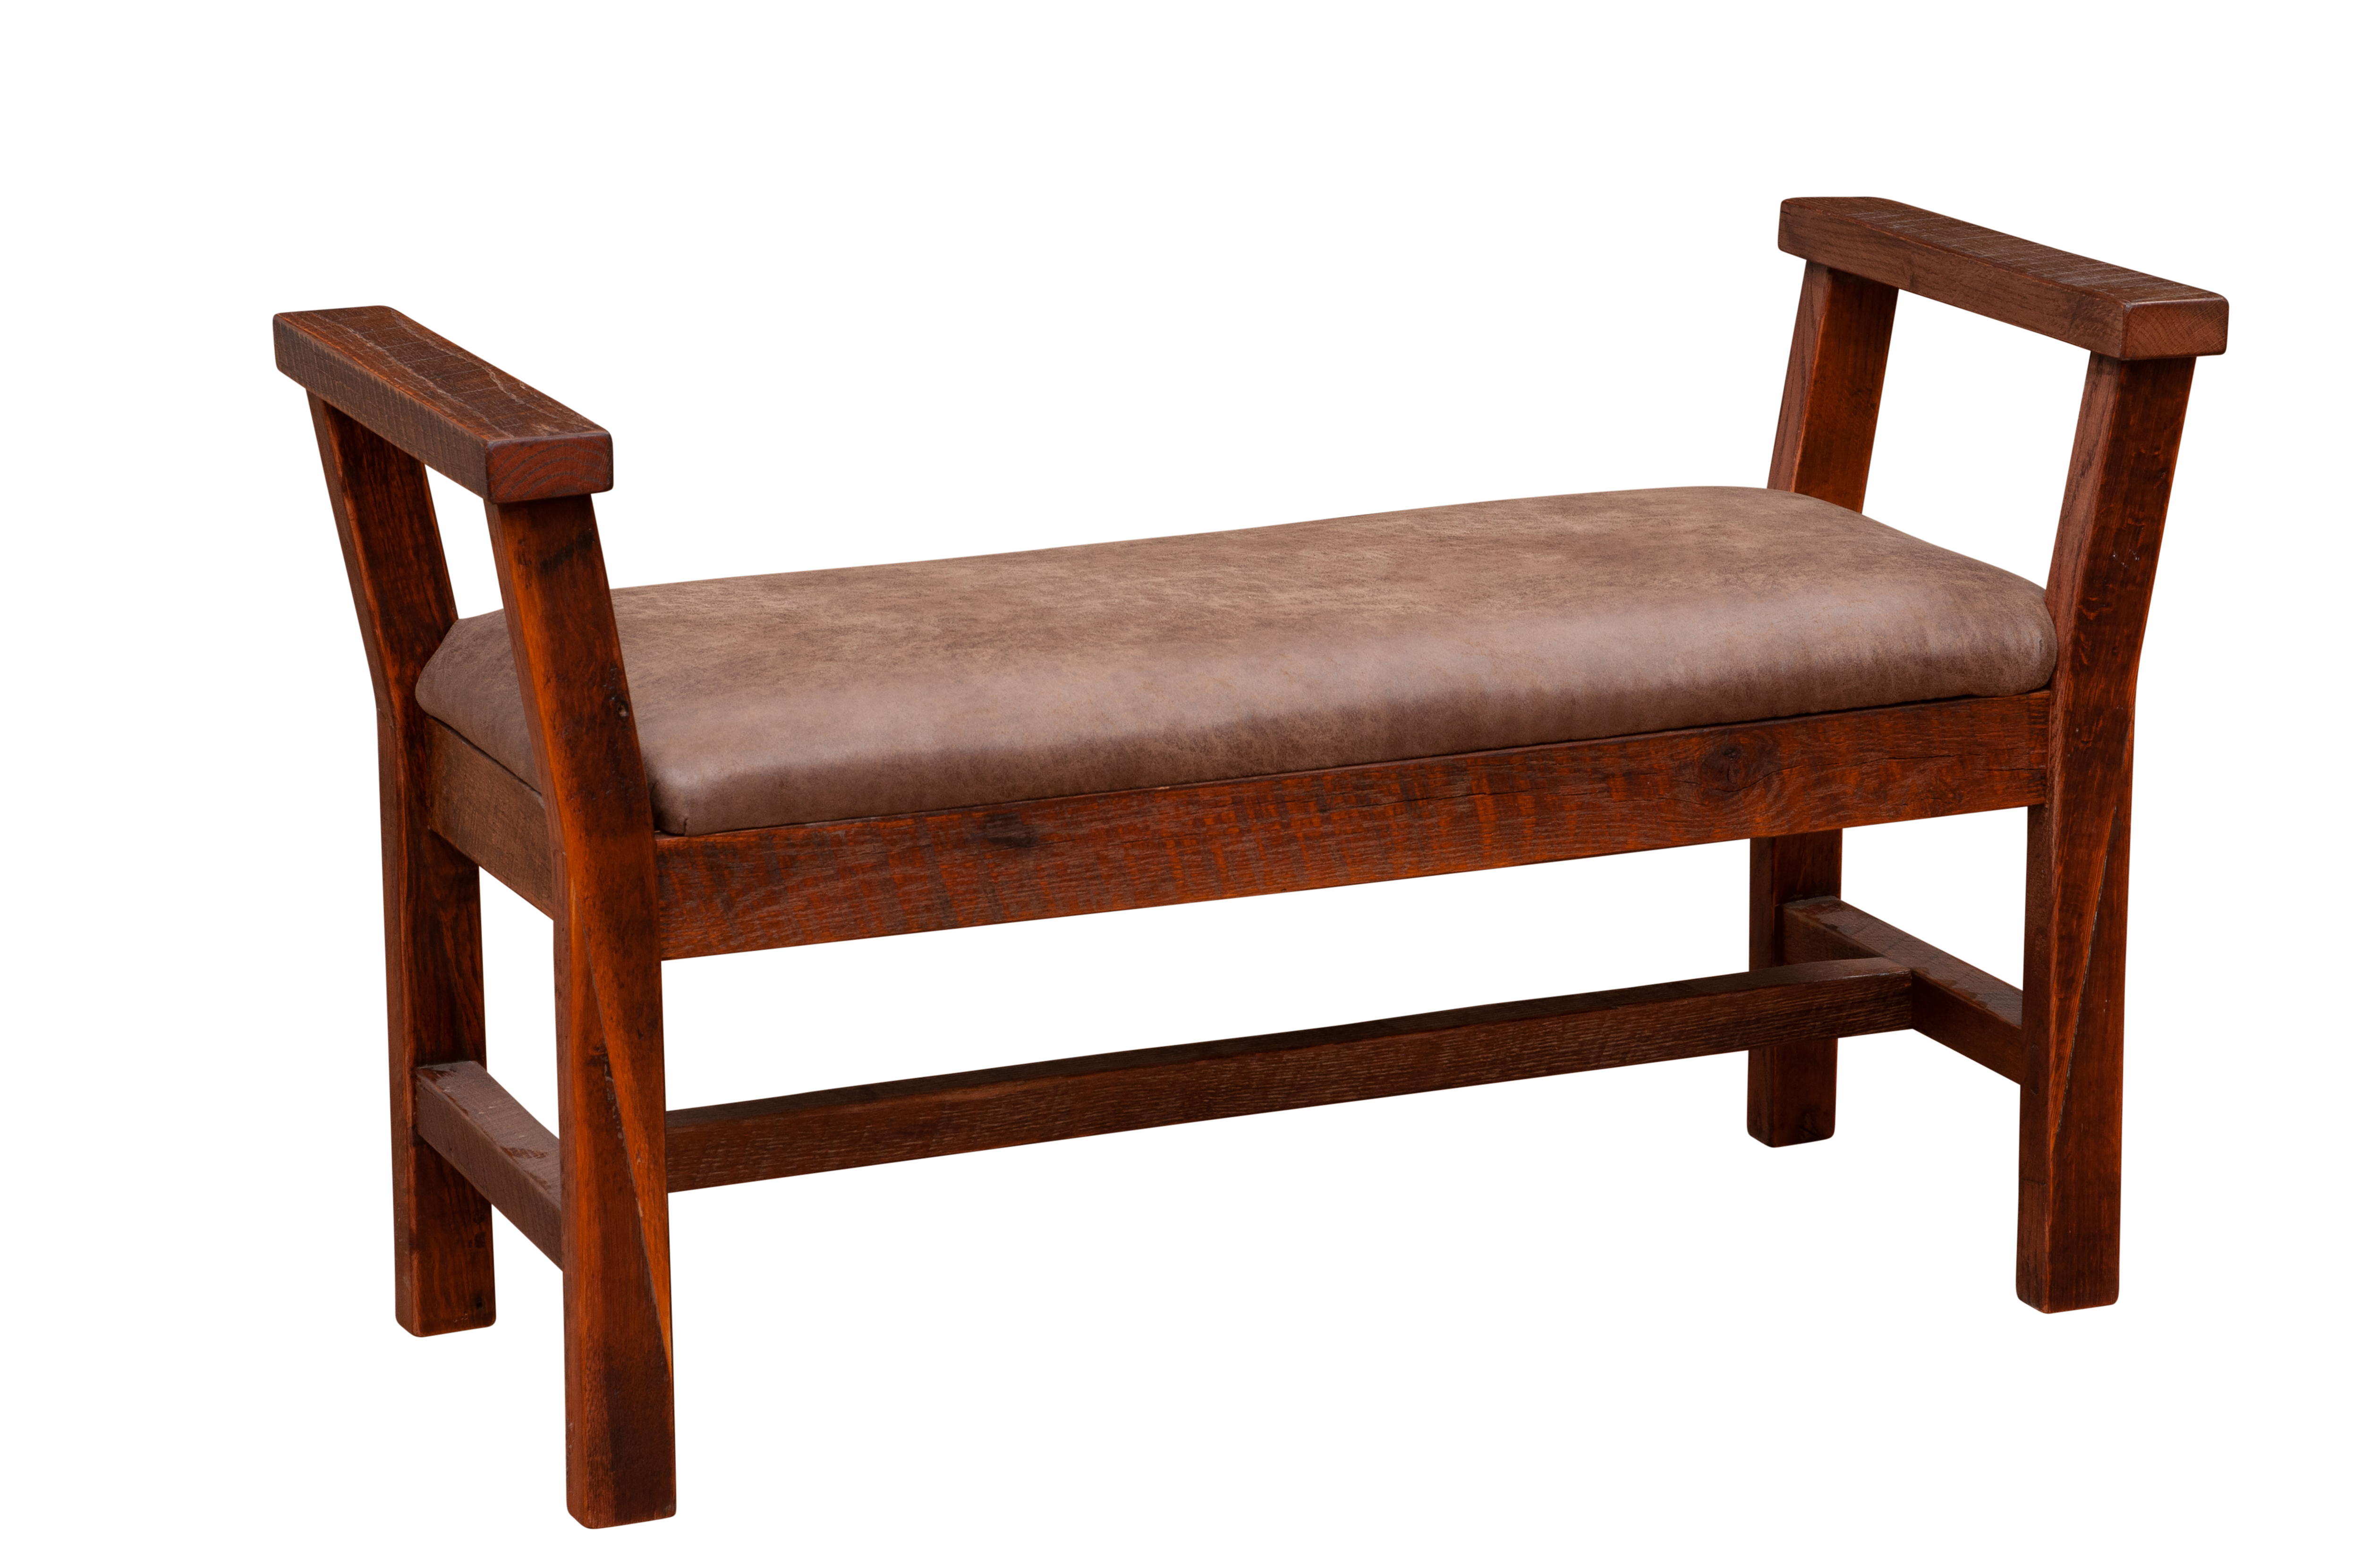 Upholstered Bench - Fireside Lodge Furniture Company